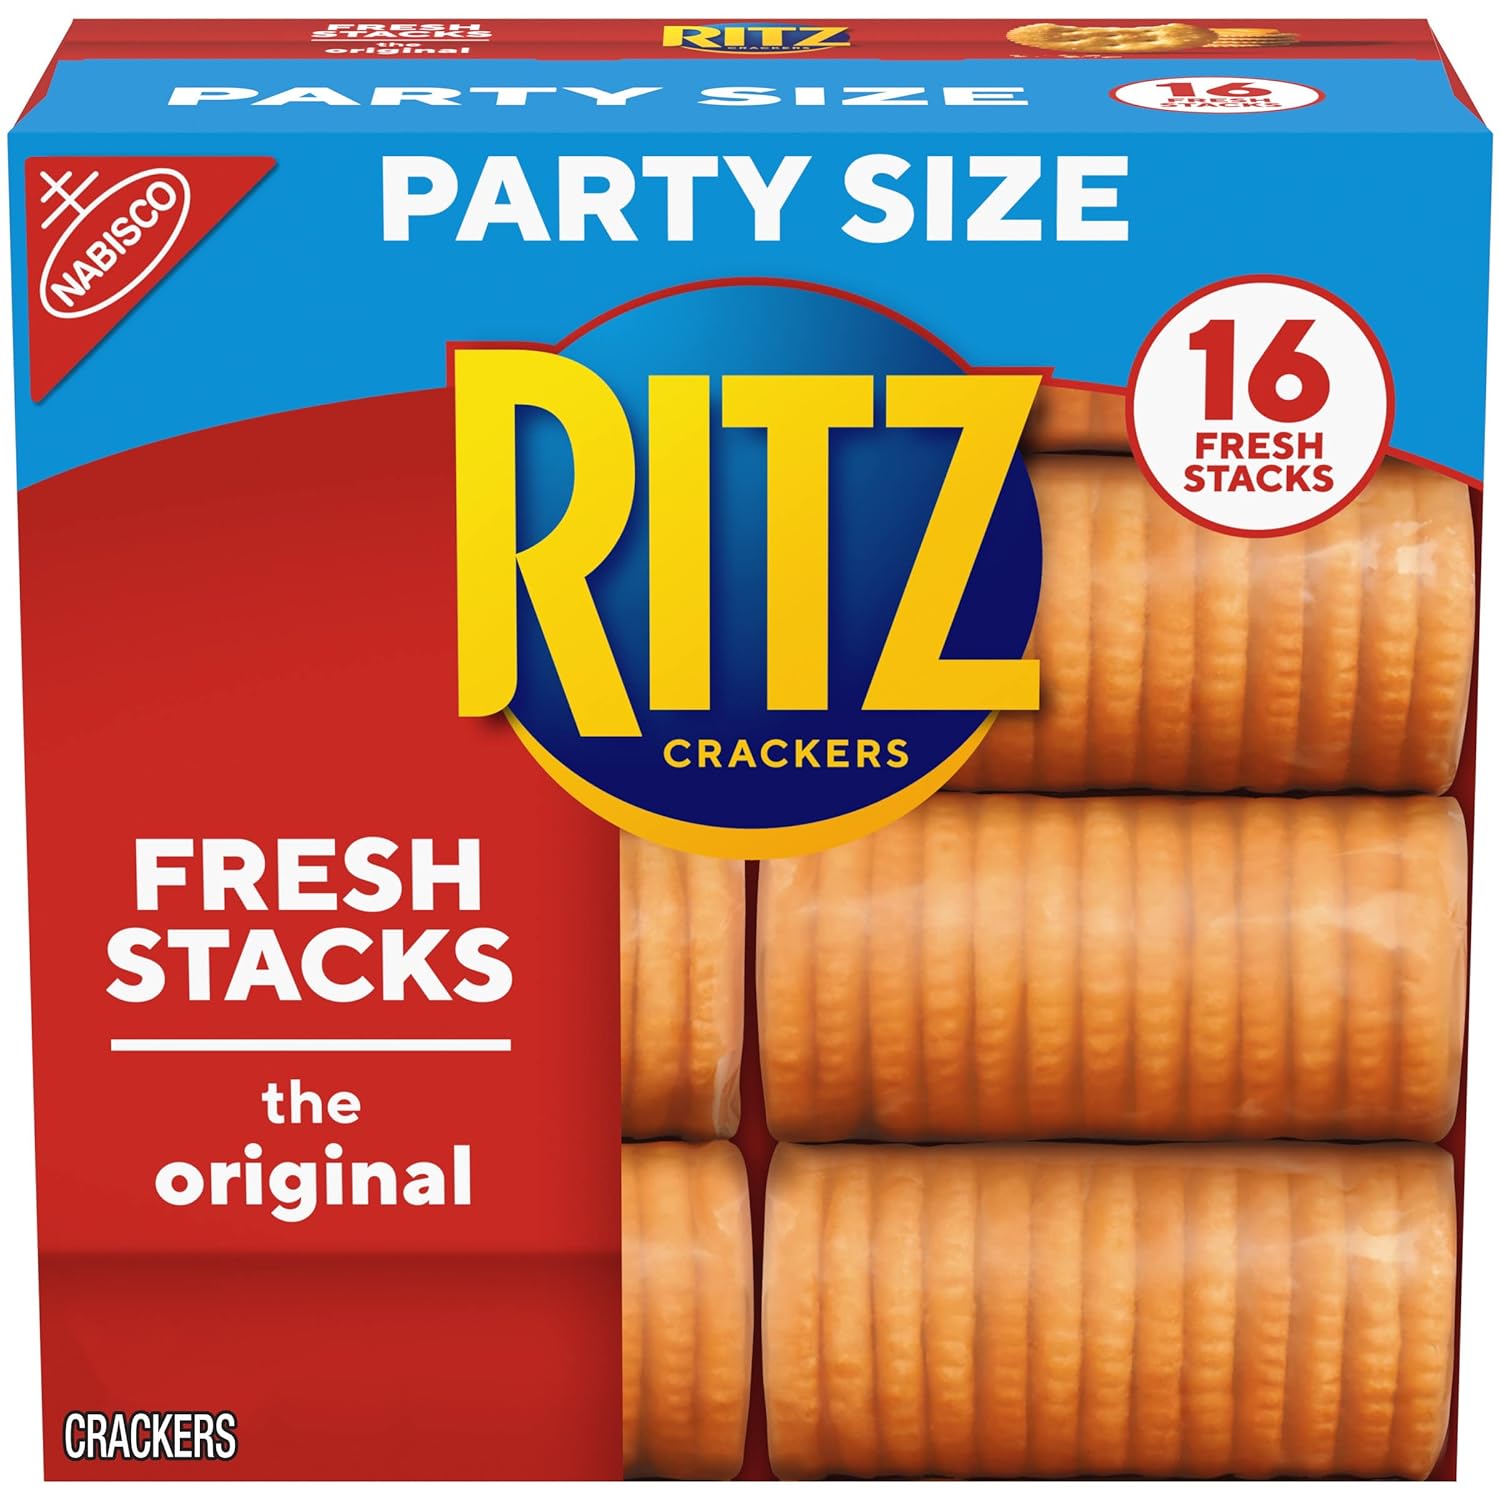 Ritz Crackers Flavor Party Size Box of Fresh Stacks 16 Sleeves Total, original, 23.7 Ounce, 16 count (Pack of 1)